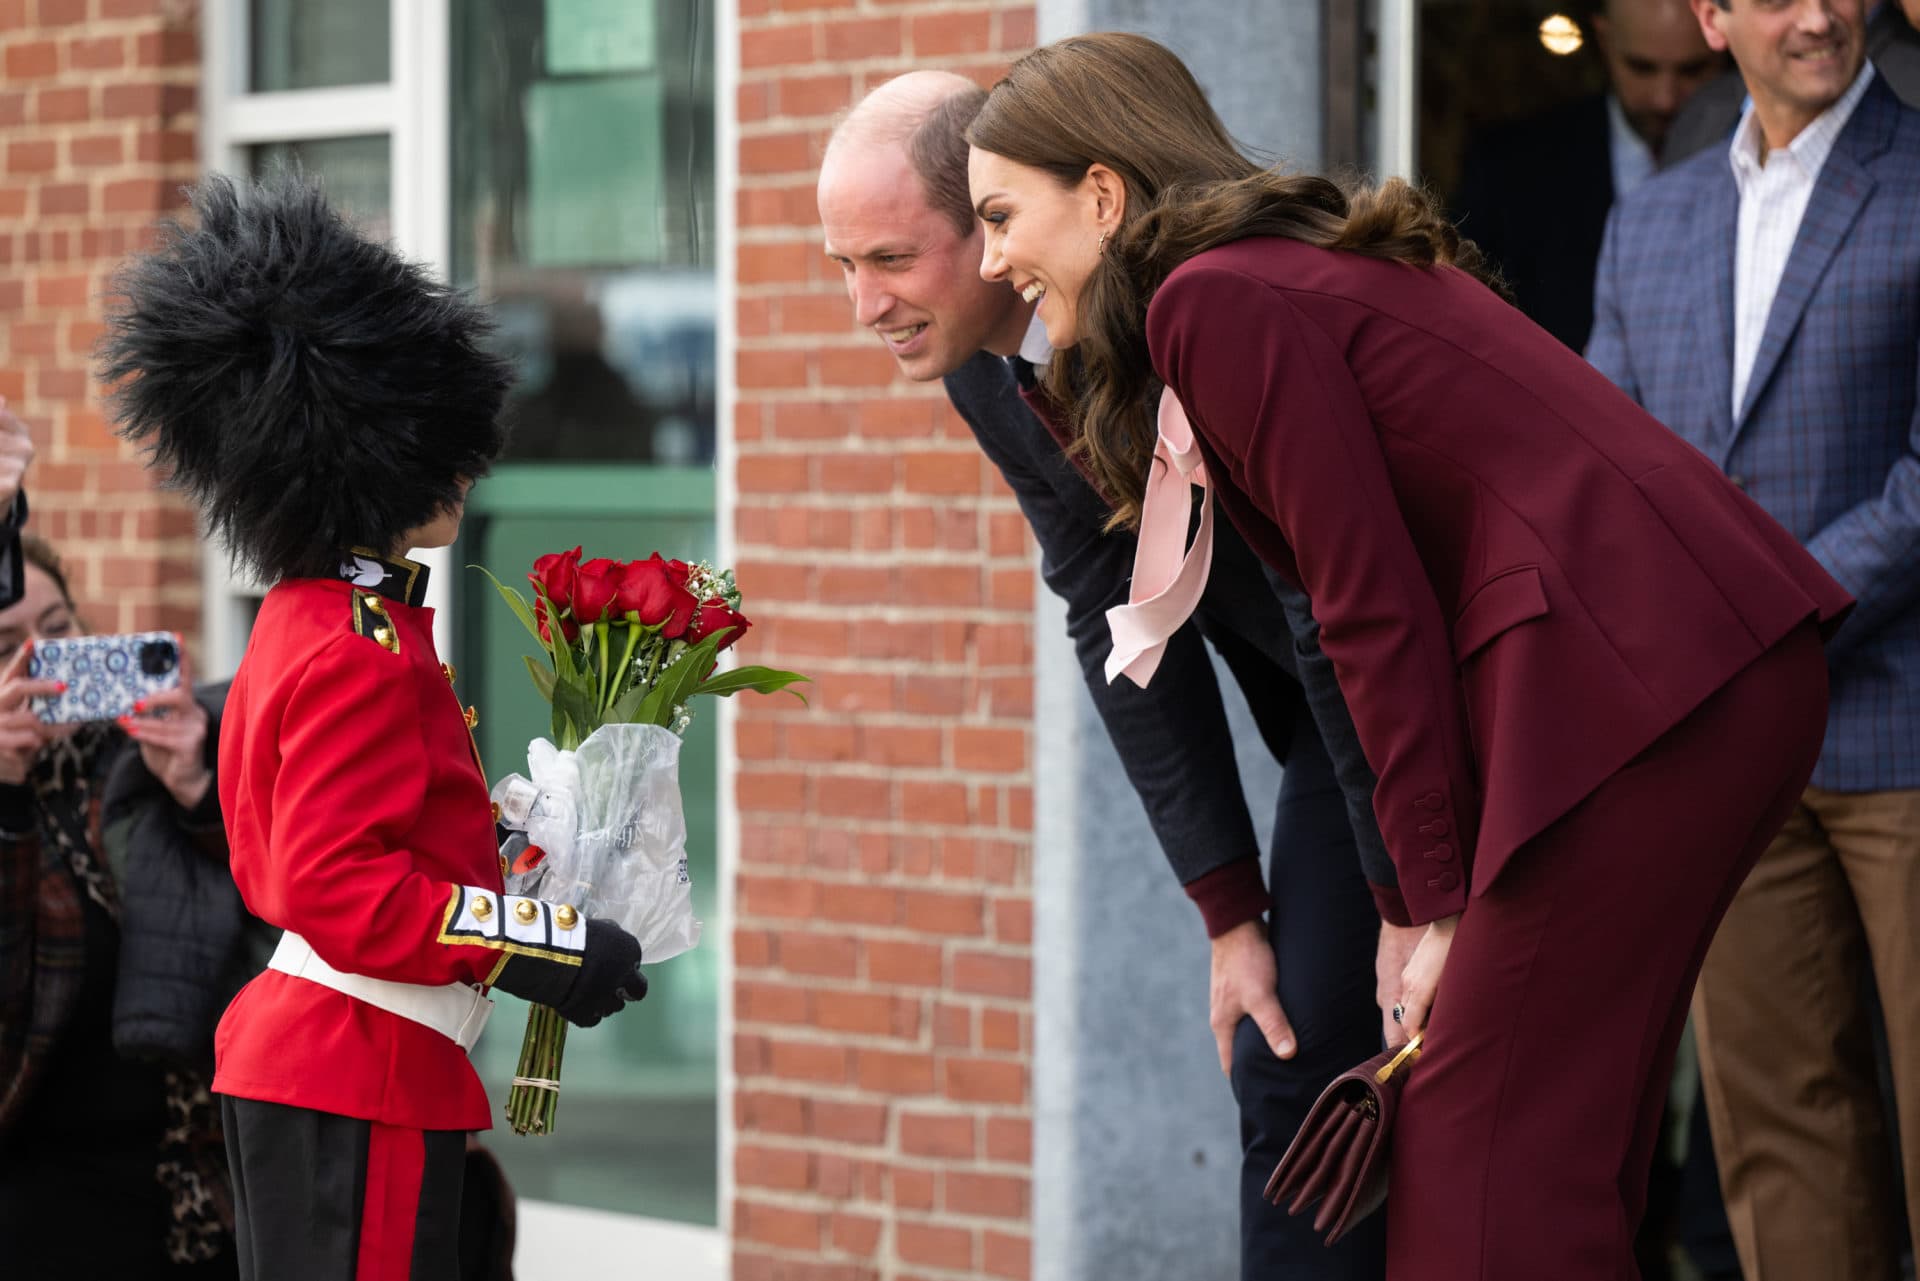 Prince William and Catherine meet a boy dressed as a guard in Boston, Massachusetts. (Samir Hussein/WireImage)